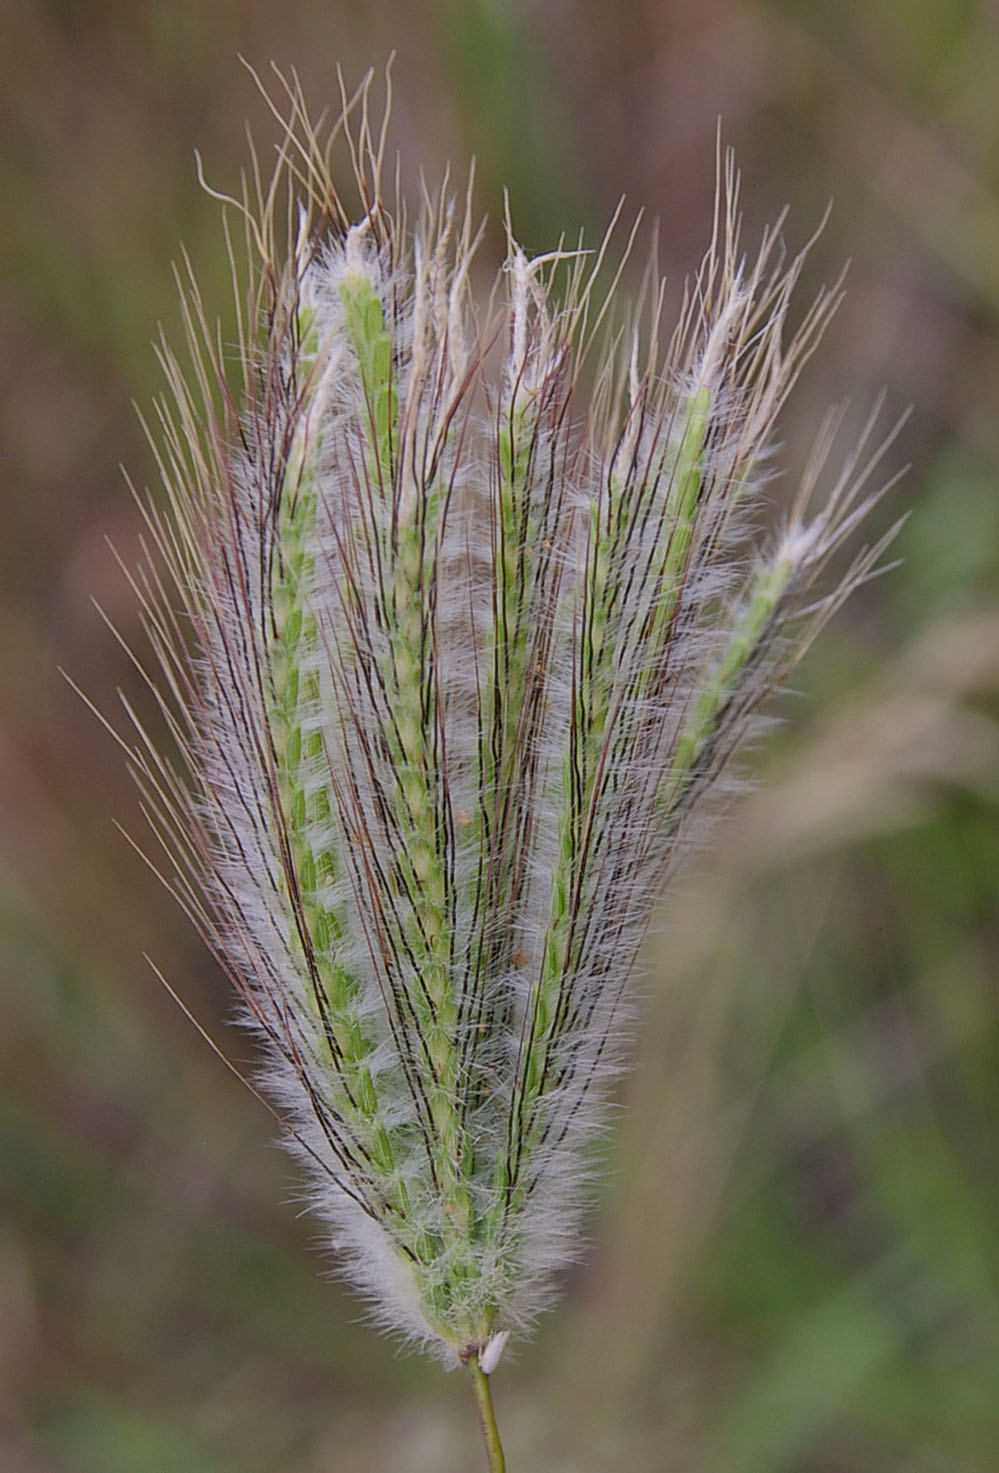 Fig. 3. Image of flowering head (inflorescence) of Dichanthium sericeum. (CC By: RJCumming d17424a)